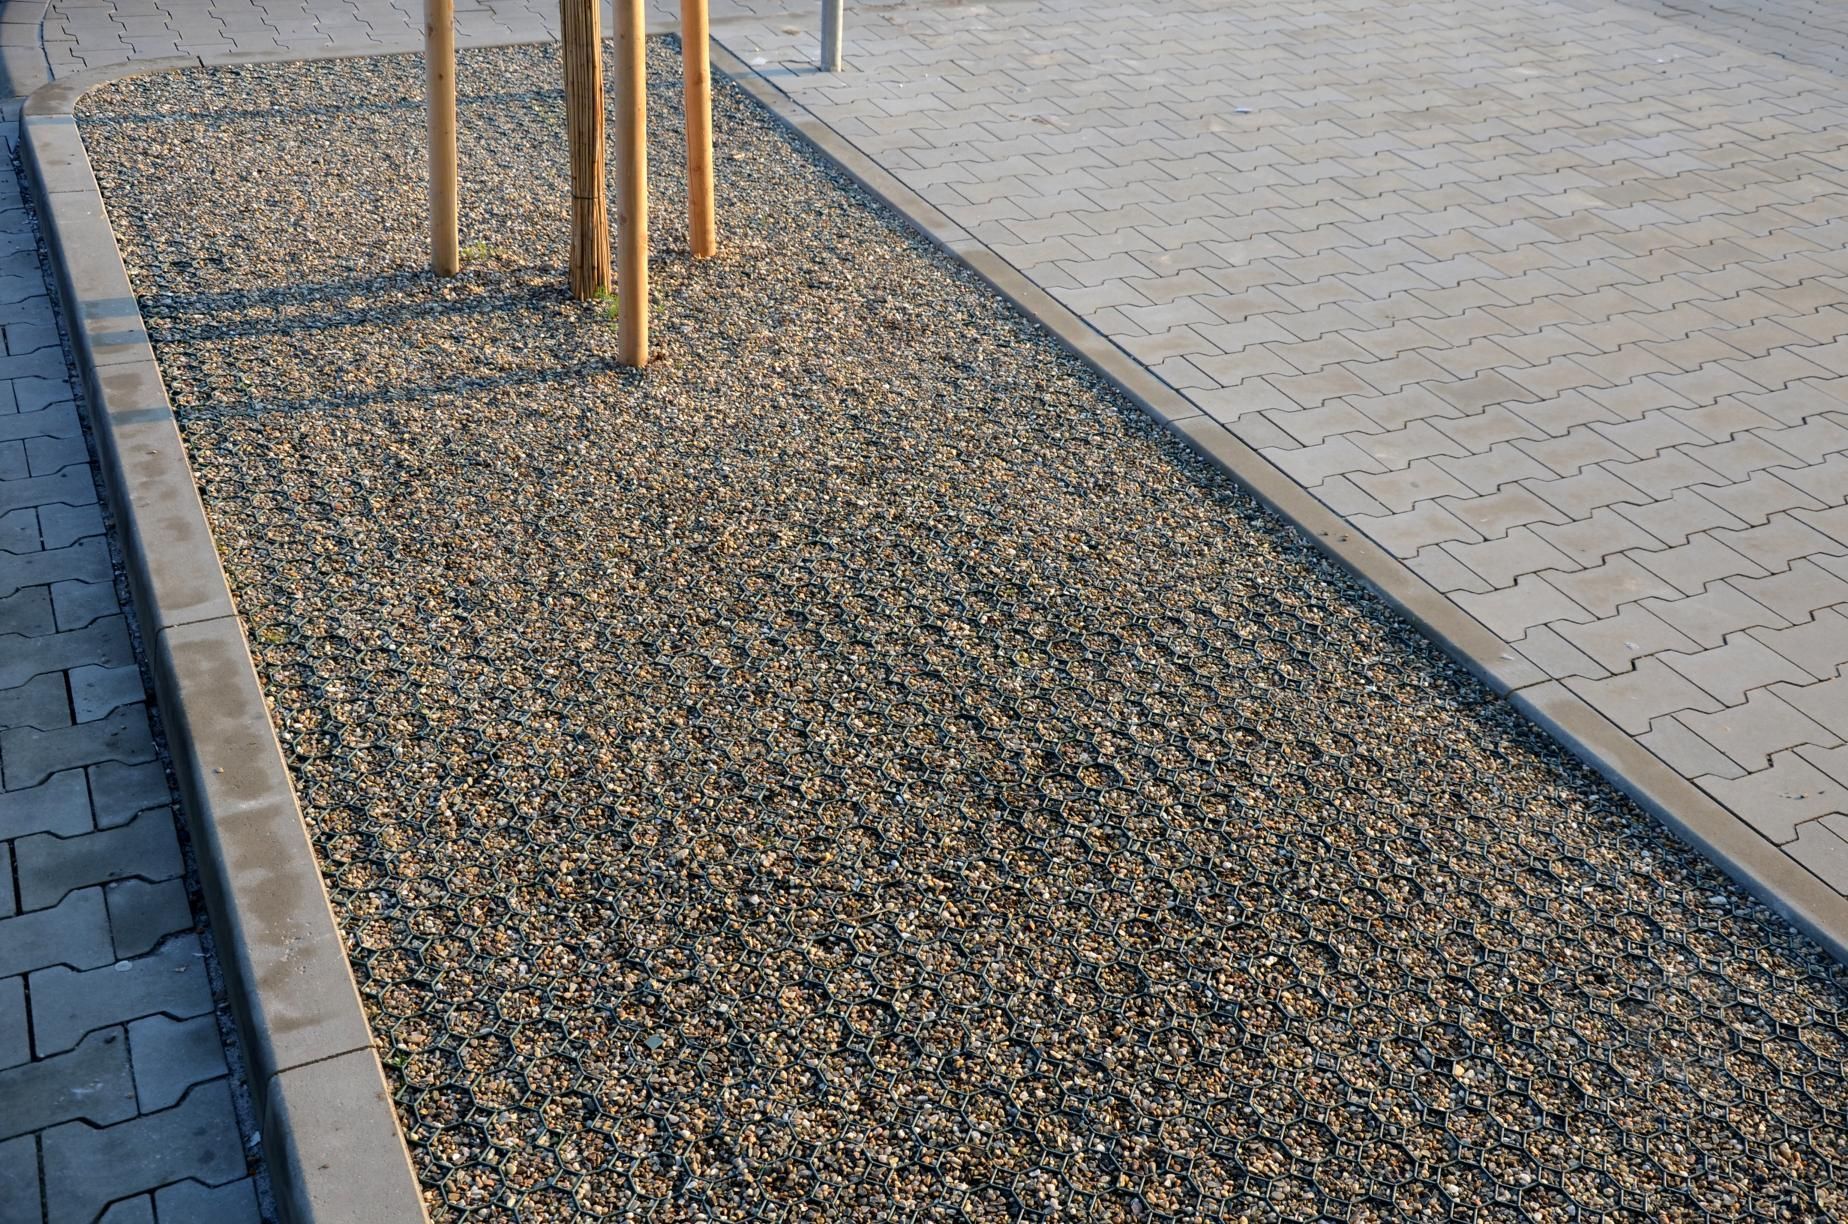 a gravel path along a sidewalk with trees in the background